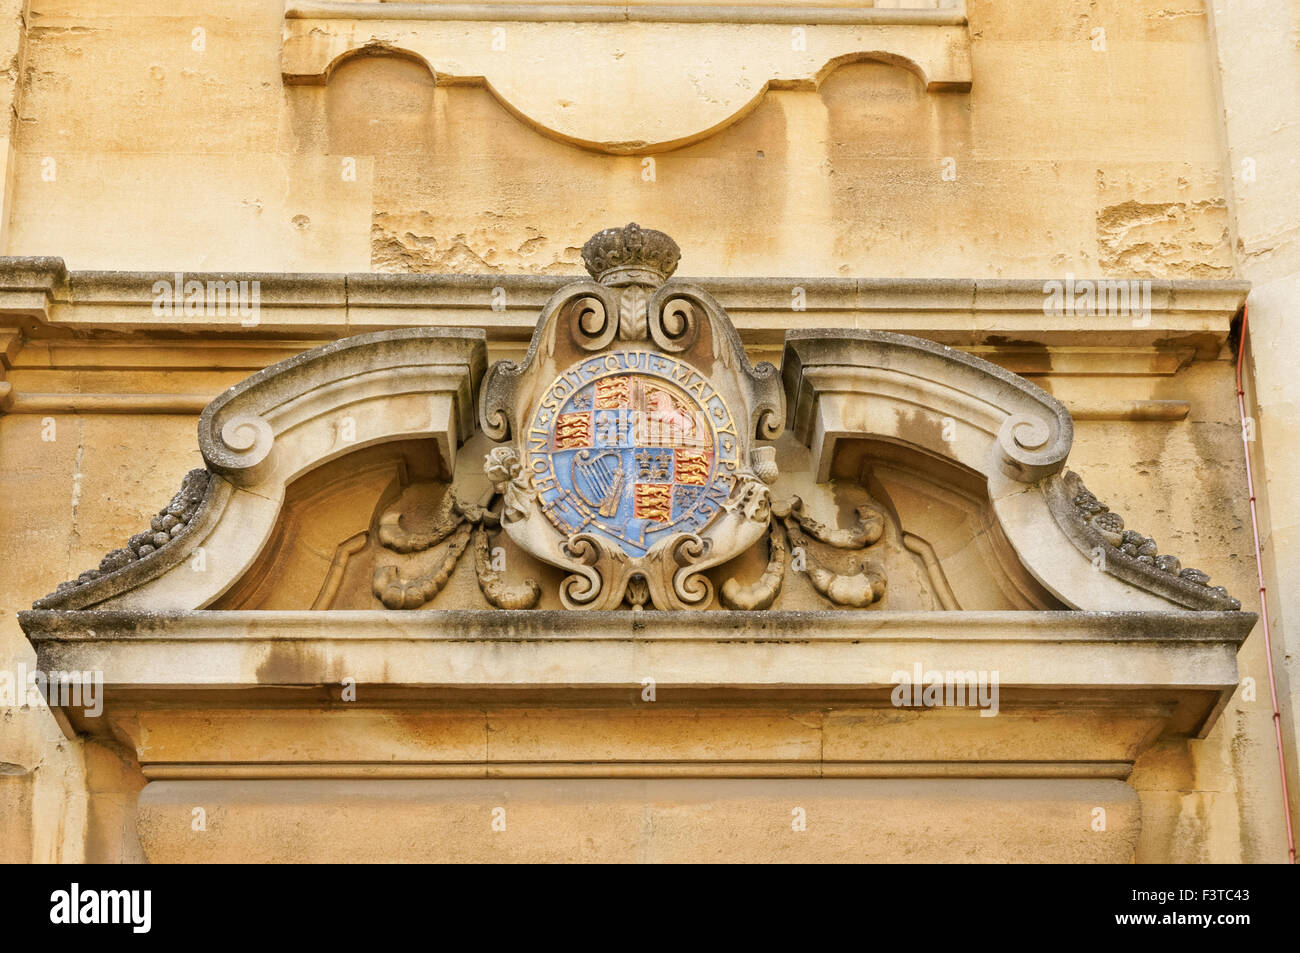 Insignia at the Courtyard of The Bodleian Library (Old Schools Quadrangle) in Oxford Oxfordshire England United Kingdom UK Stock Photo